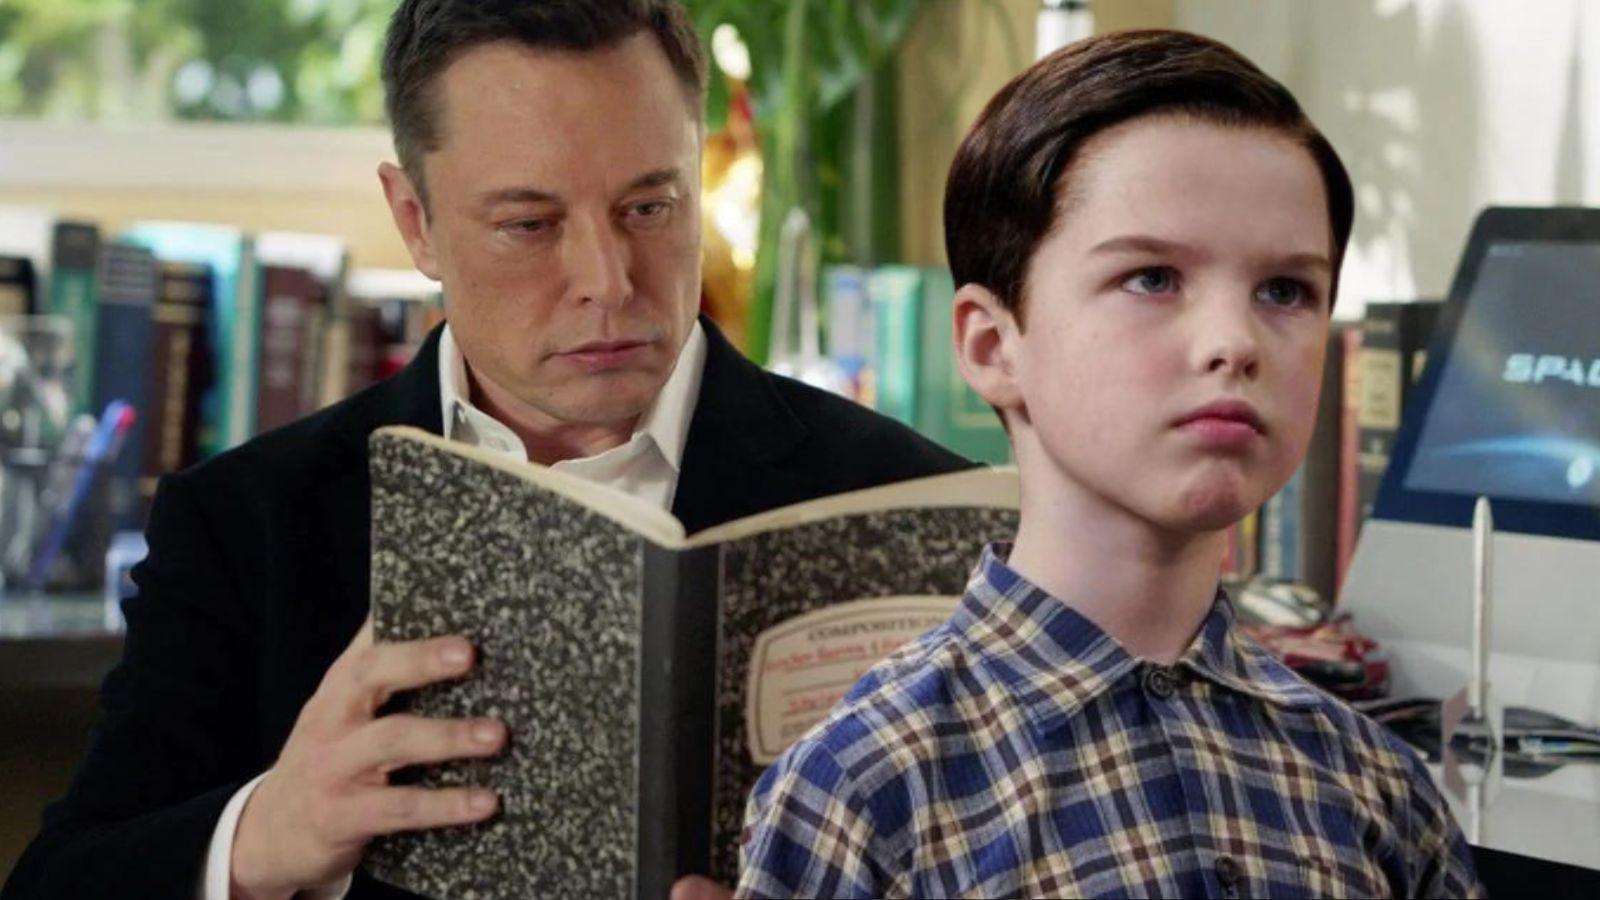 Elon Musk and Iain Armitage in Young Sheldon